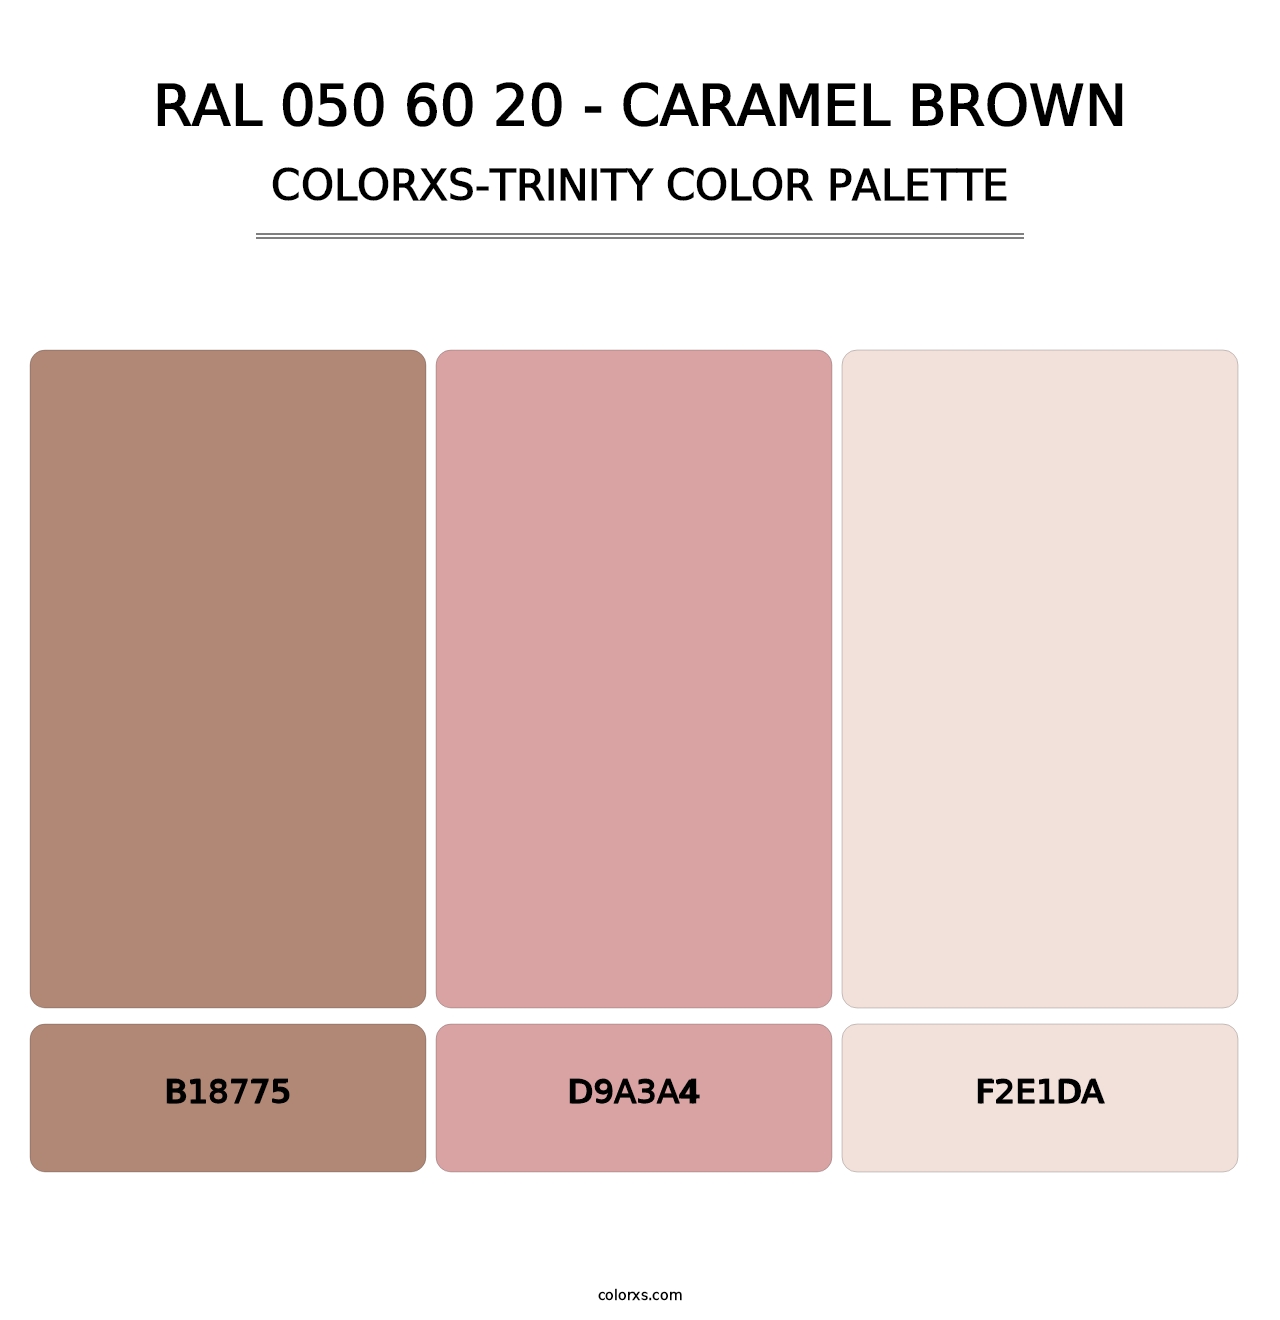 RAL 050 60 20 - Caramel Brown - Colorxs Trinity Palette